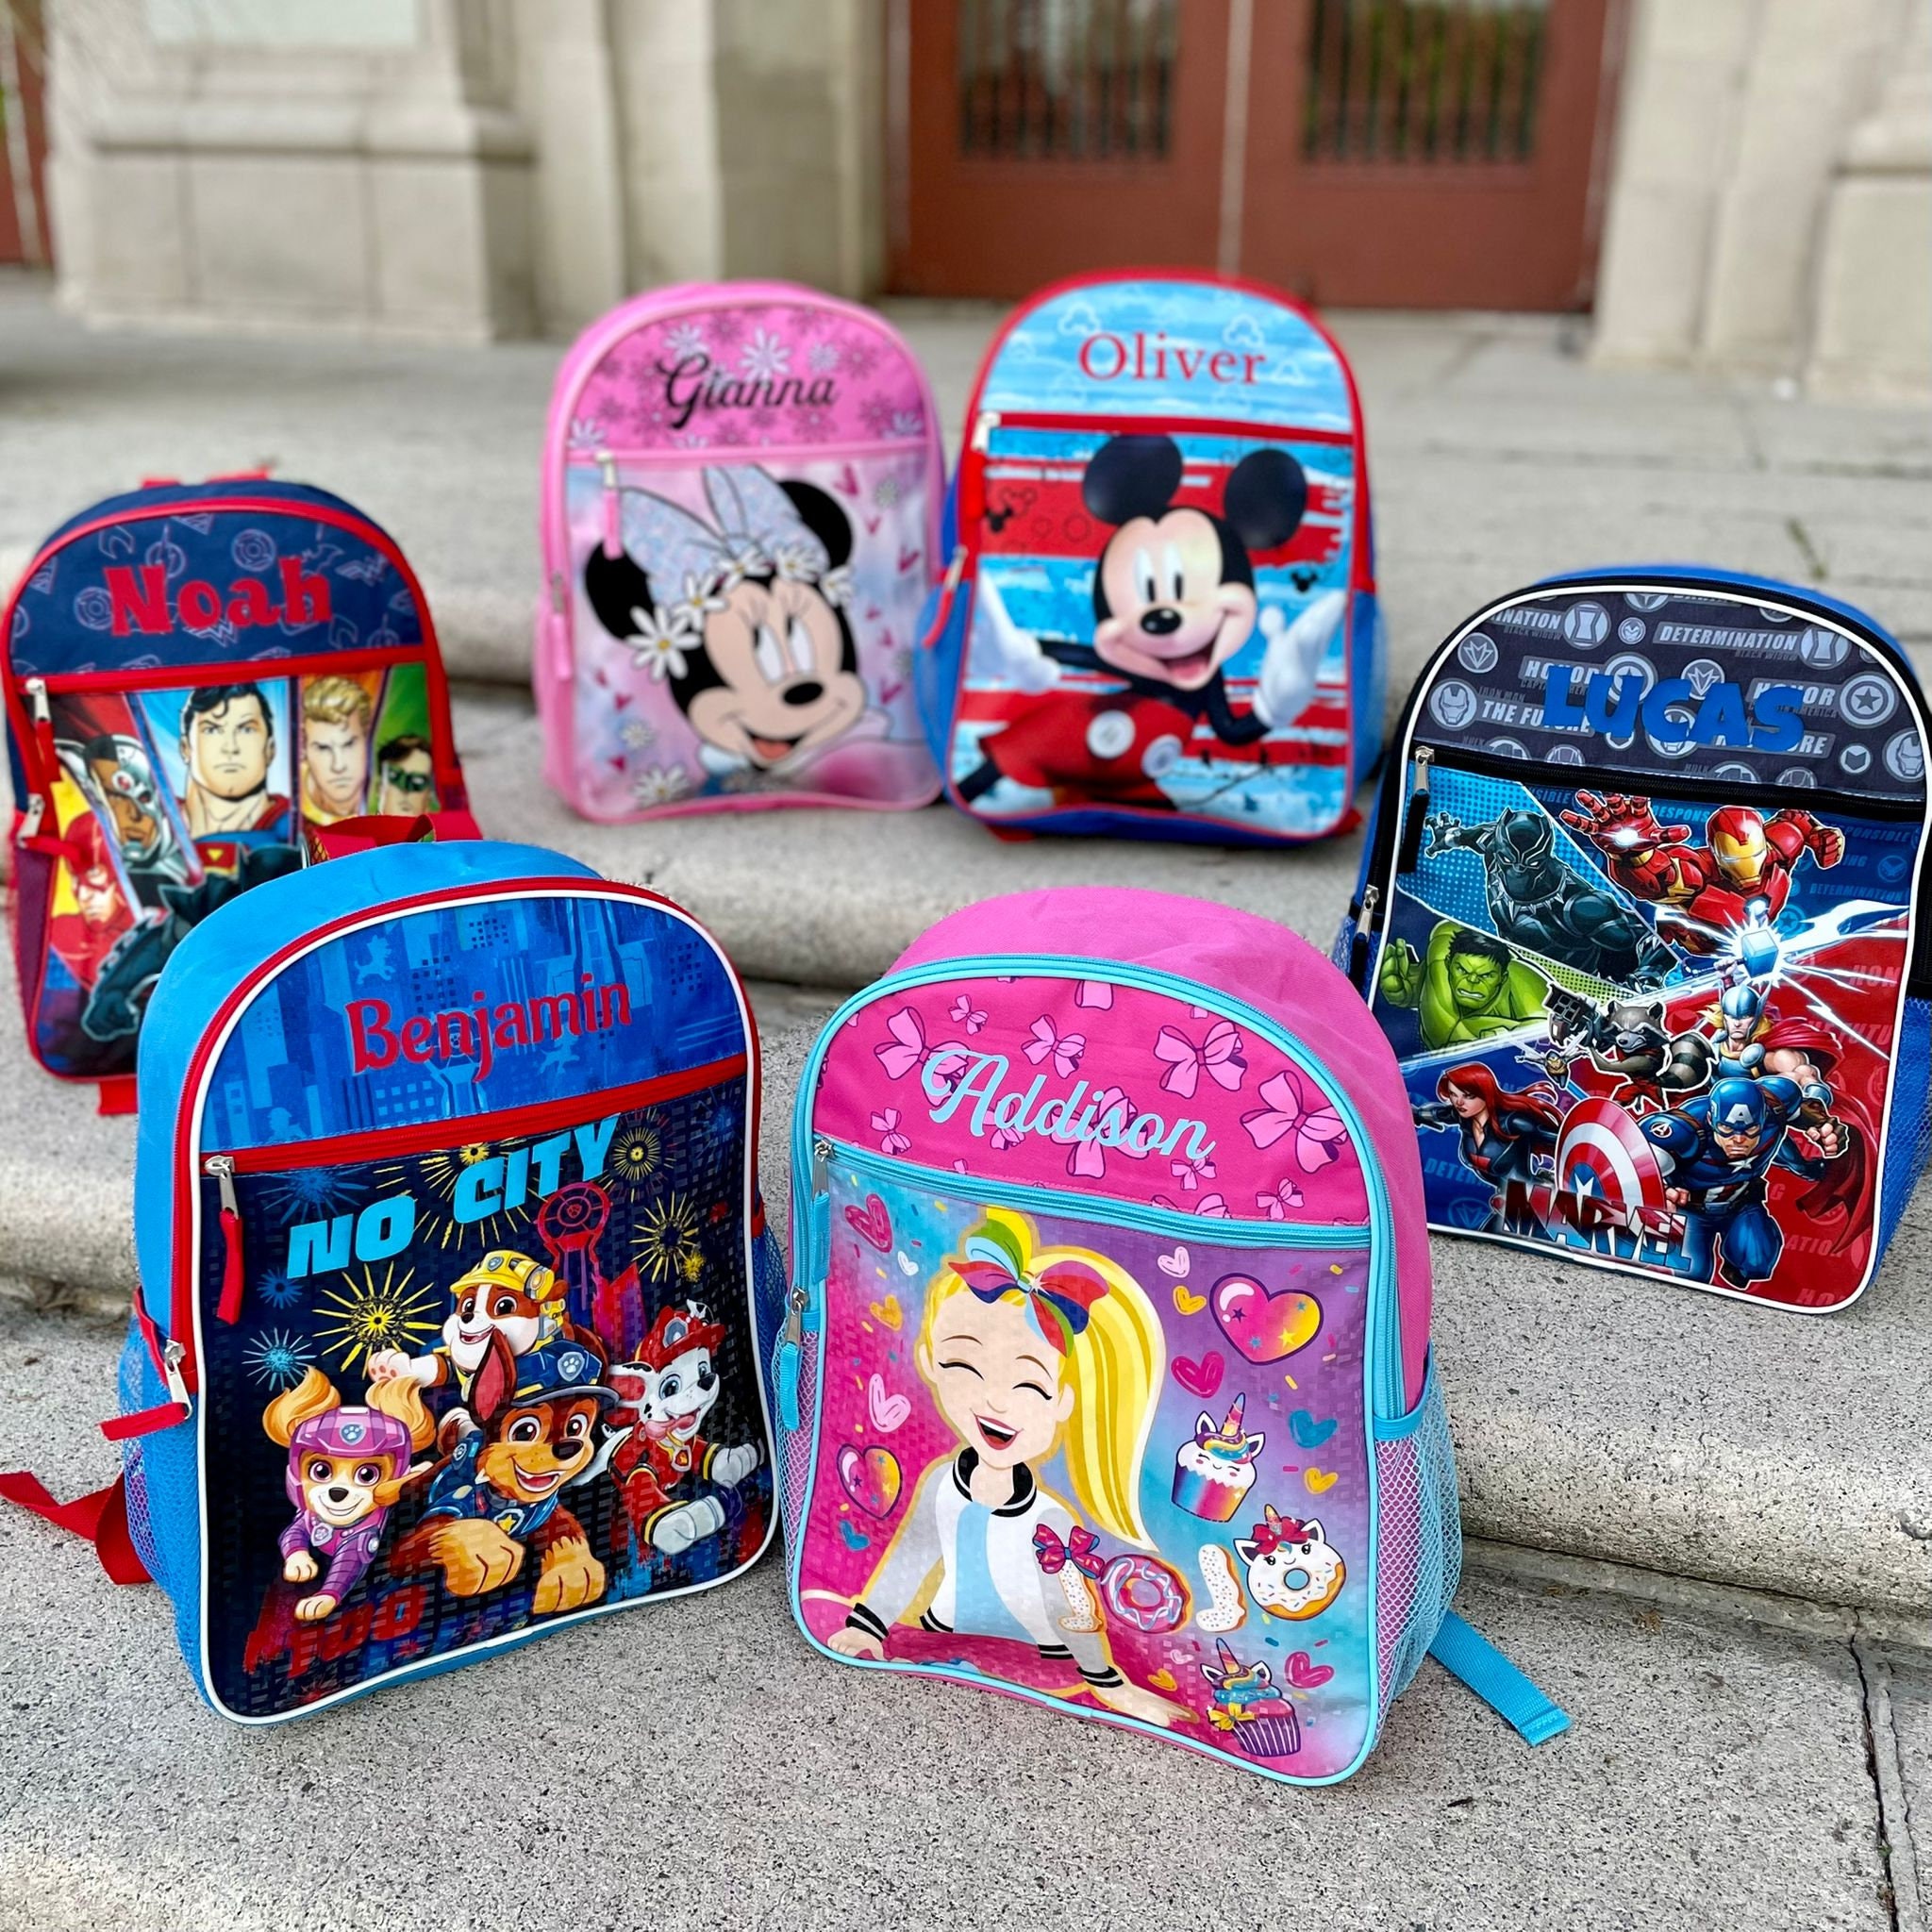 Personalized Mickey Mouse Character Backpack 16 Inch -  Hong Kong